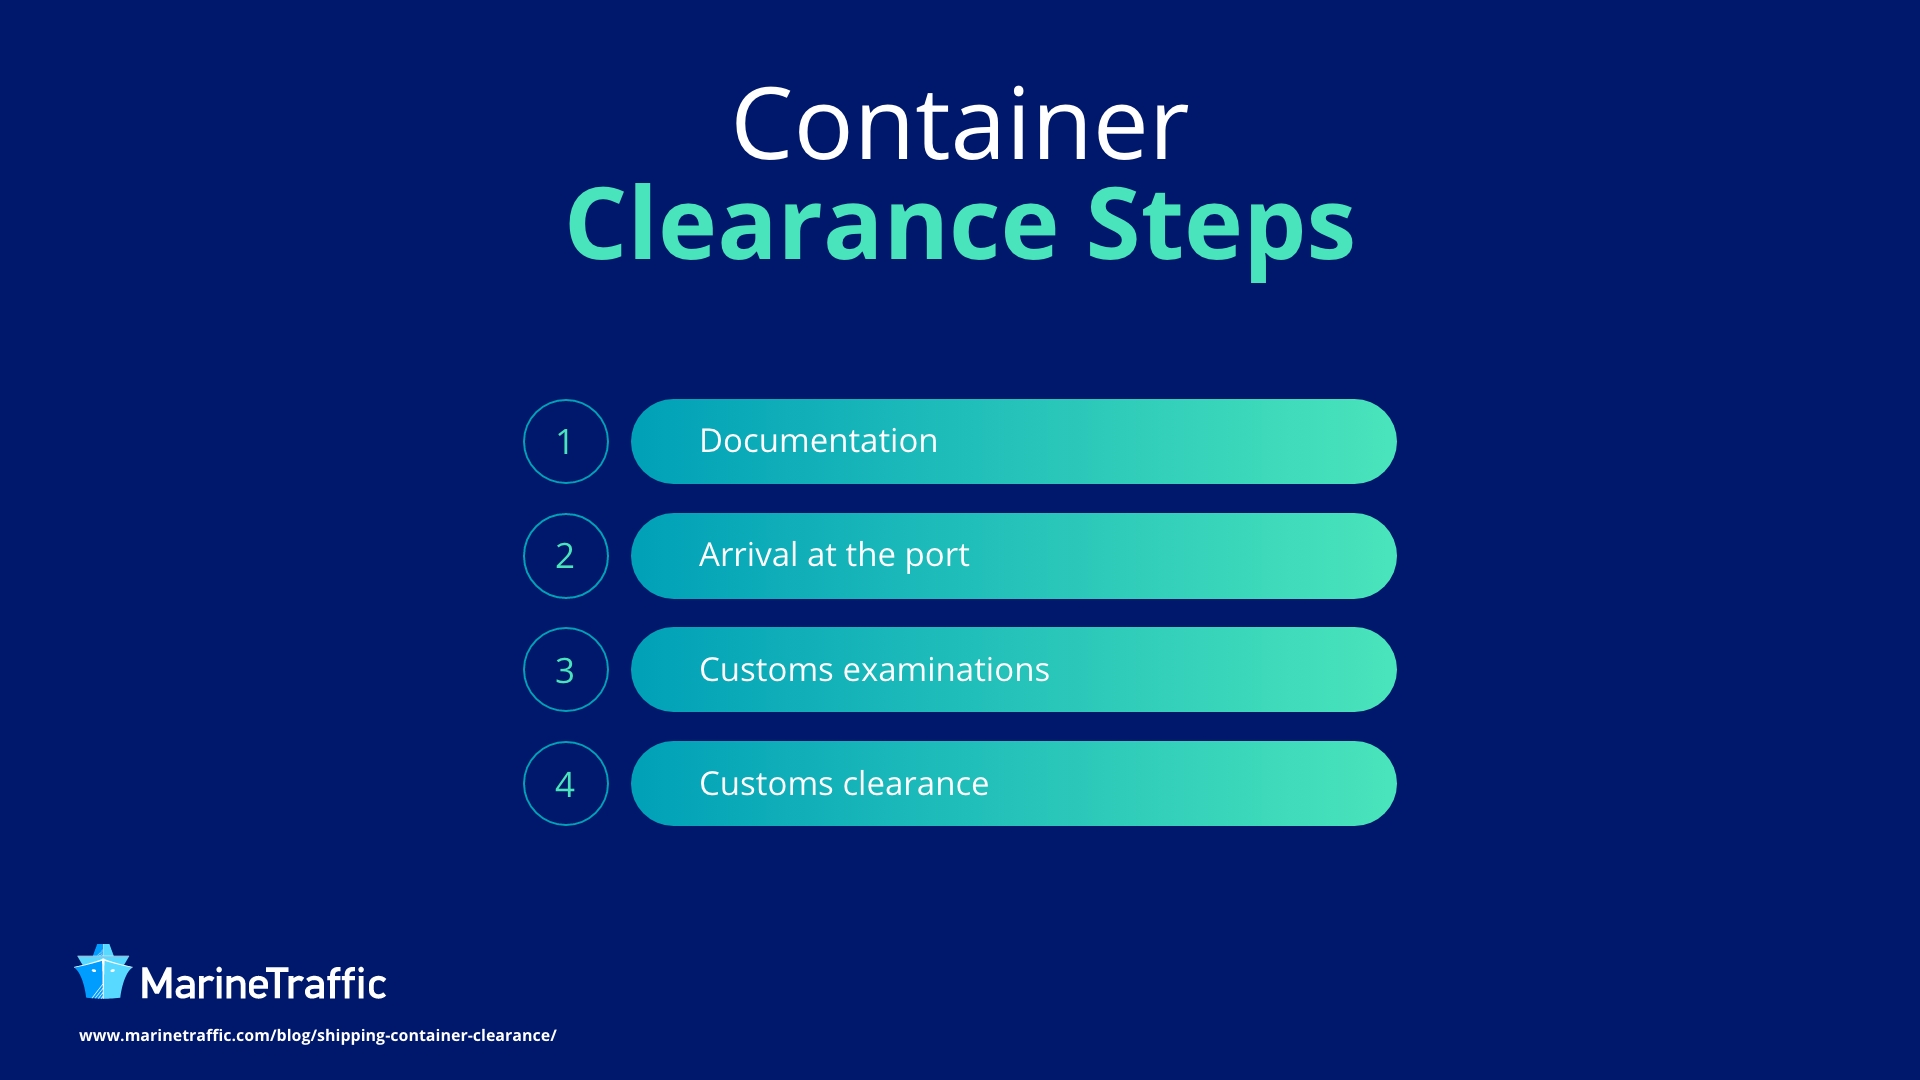 Container clearance steps